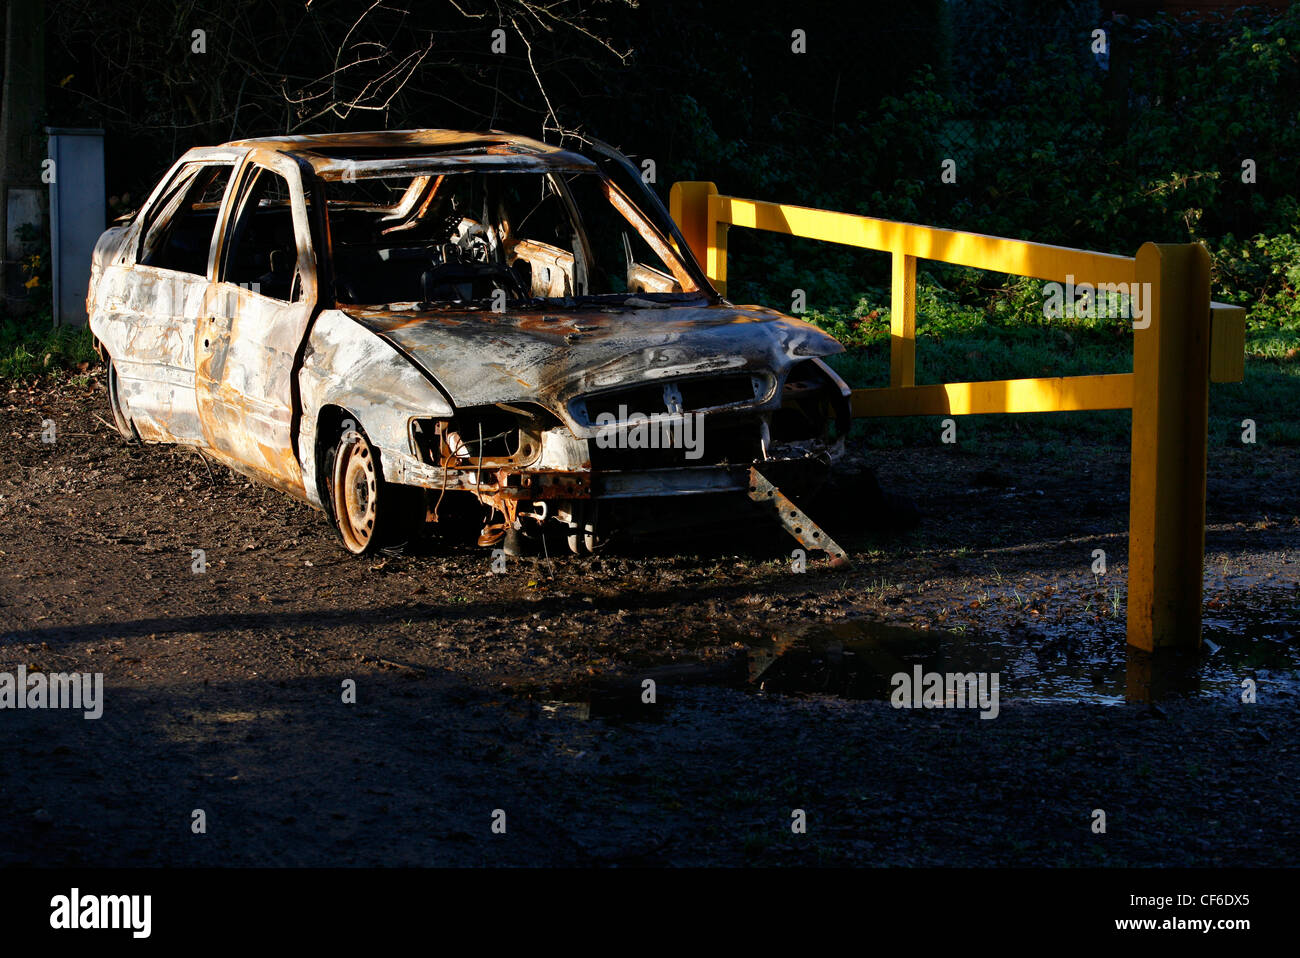 A burnt out car in sunlight. Every year in the UK around 200 cars a day go up in flames with 65% of these fires started delibera Stock Photo